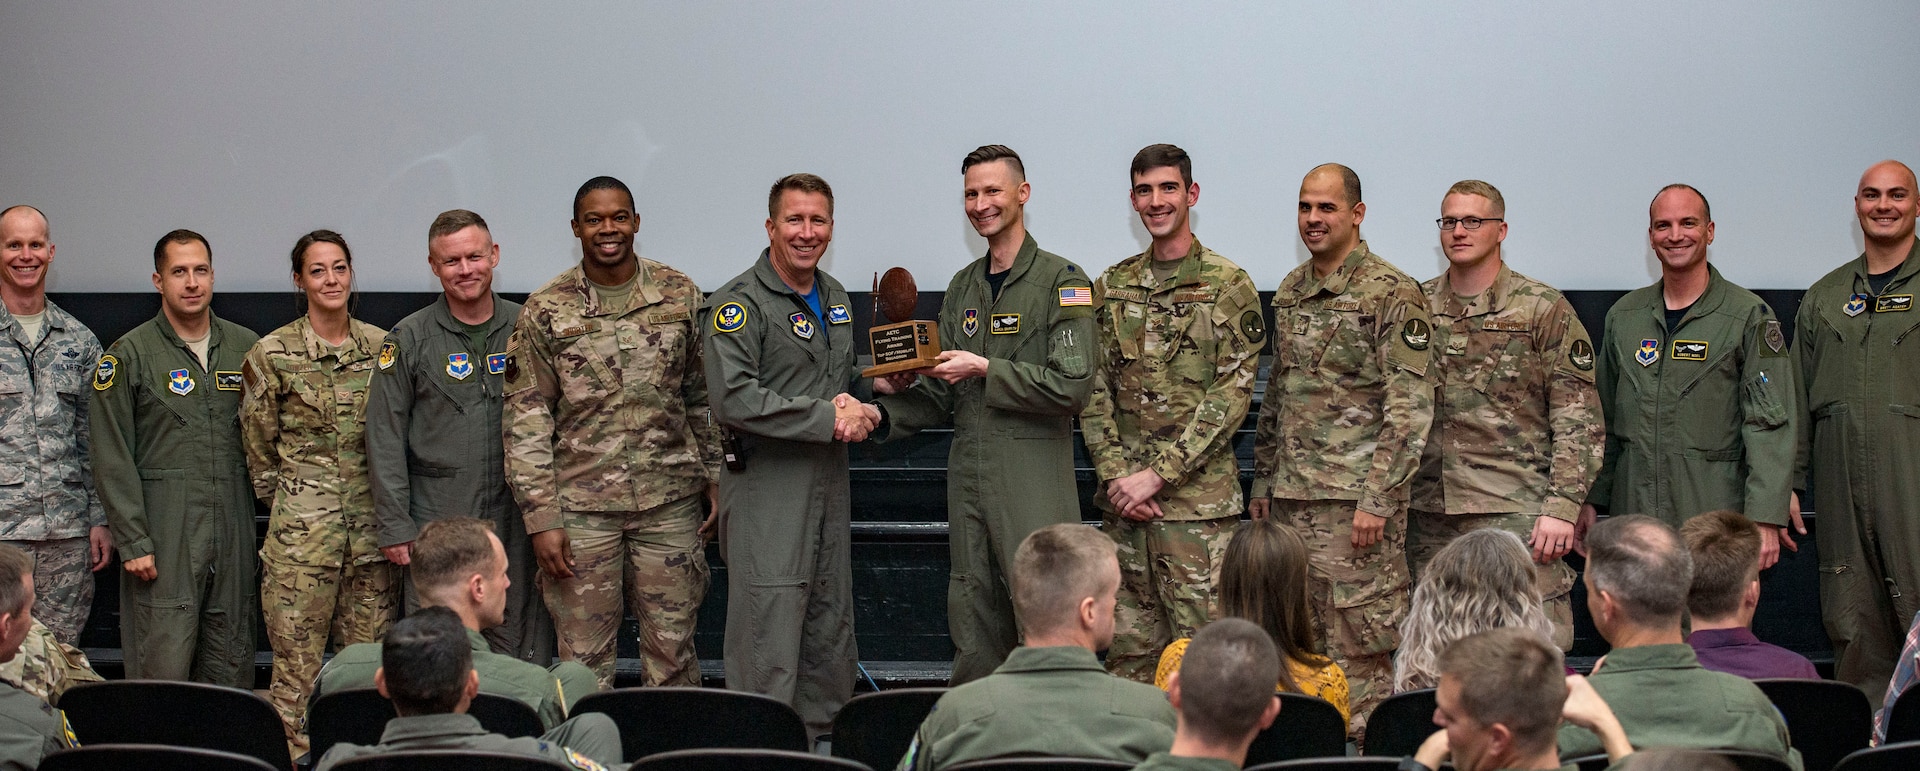 Maj. Gen. Patrick Doherty, 19th Air Force commander, presents the Top Special Operations Force/Mobility Squadron Award to Lt. Col. Aaron Griffith, 415th Special Operations Squadron commander, during the Air Education and Training Command Flying Training Awards Ceremony Oct. 26, 2018, at Joint Base San Antonio-Randolph, Texas. The award ceremony recognizes individuals, squadrons, groups and wings whose efforts have led to the highest levels of student production.